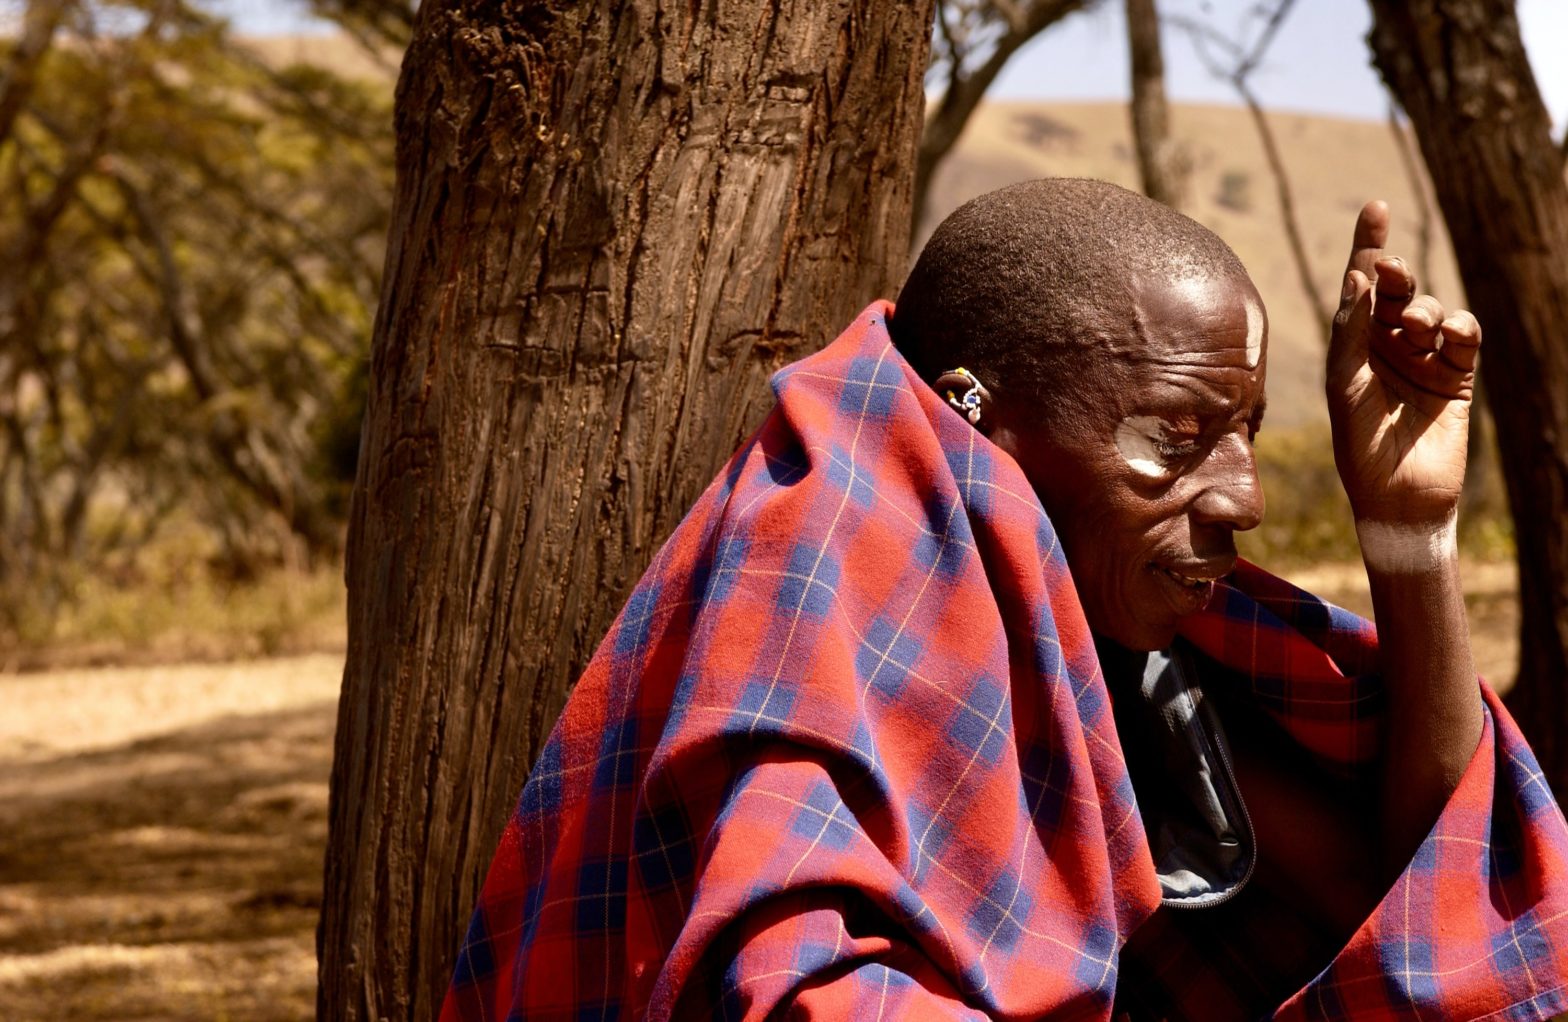 Indigenous Maasai People Shot At And Displaced For Game 'Conservation' In Tanzania